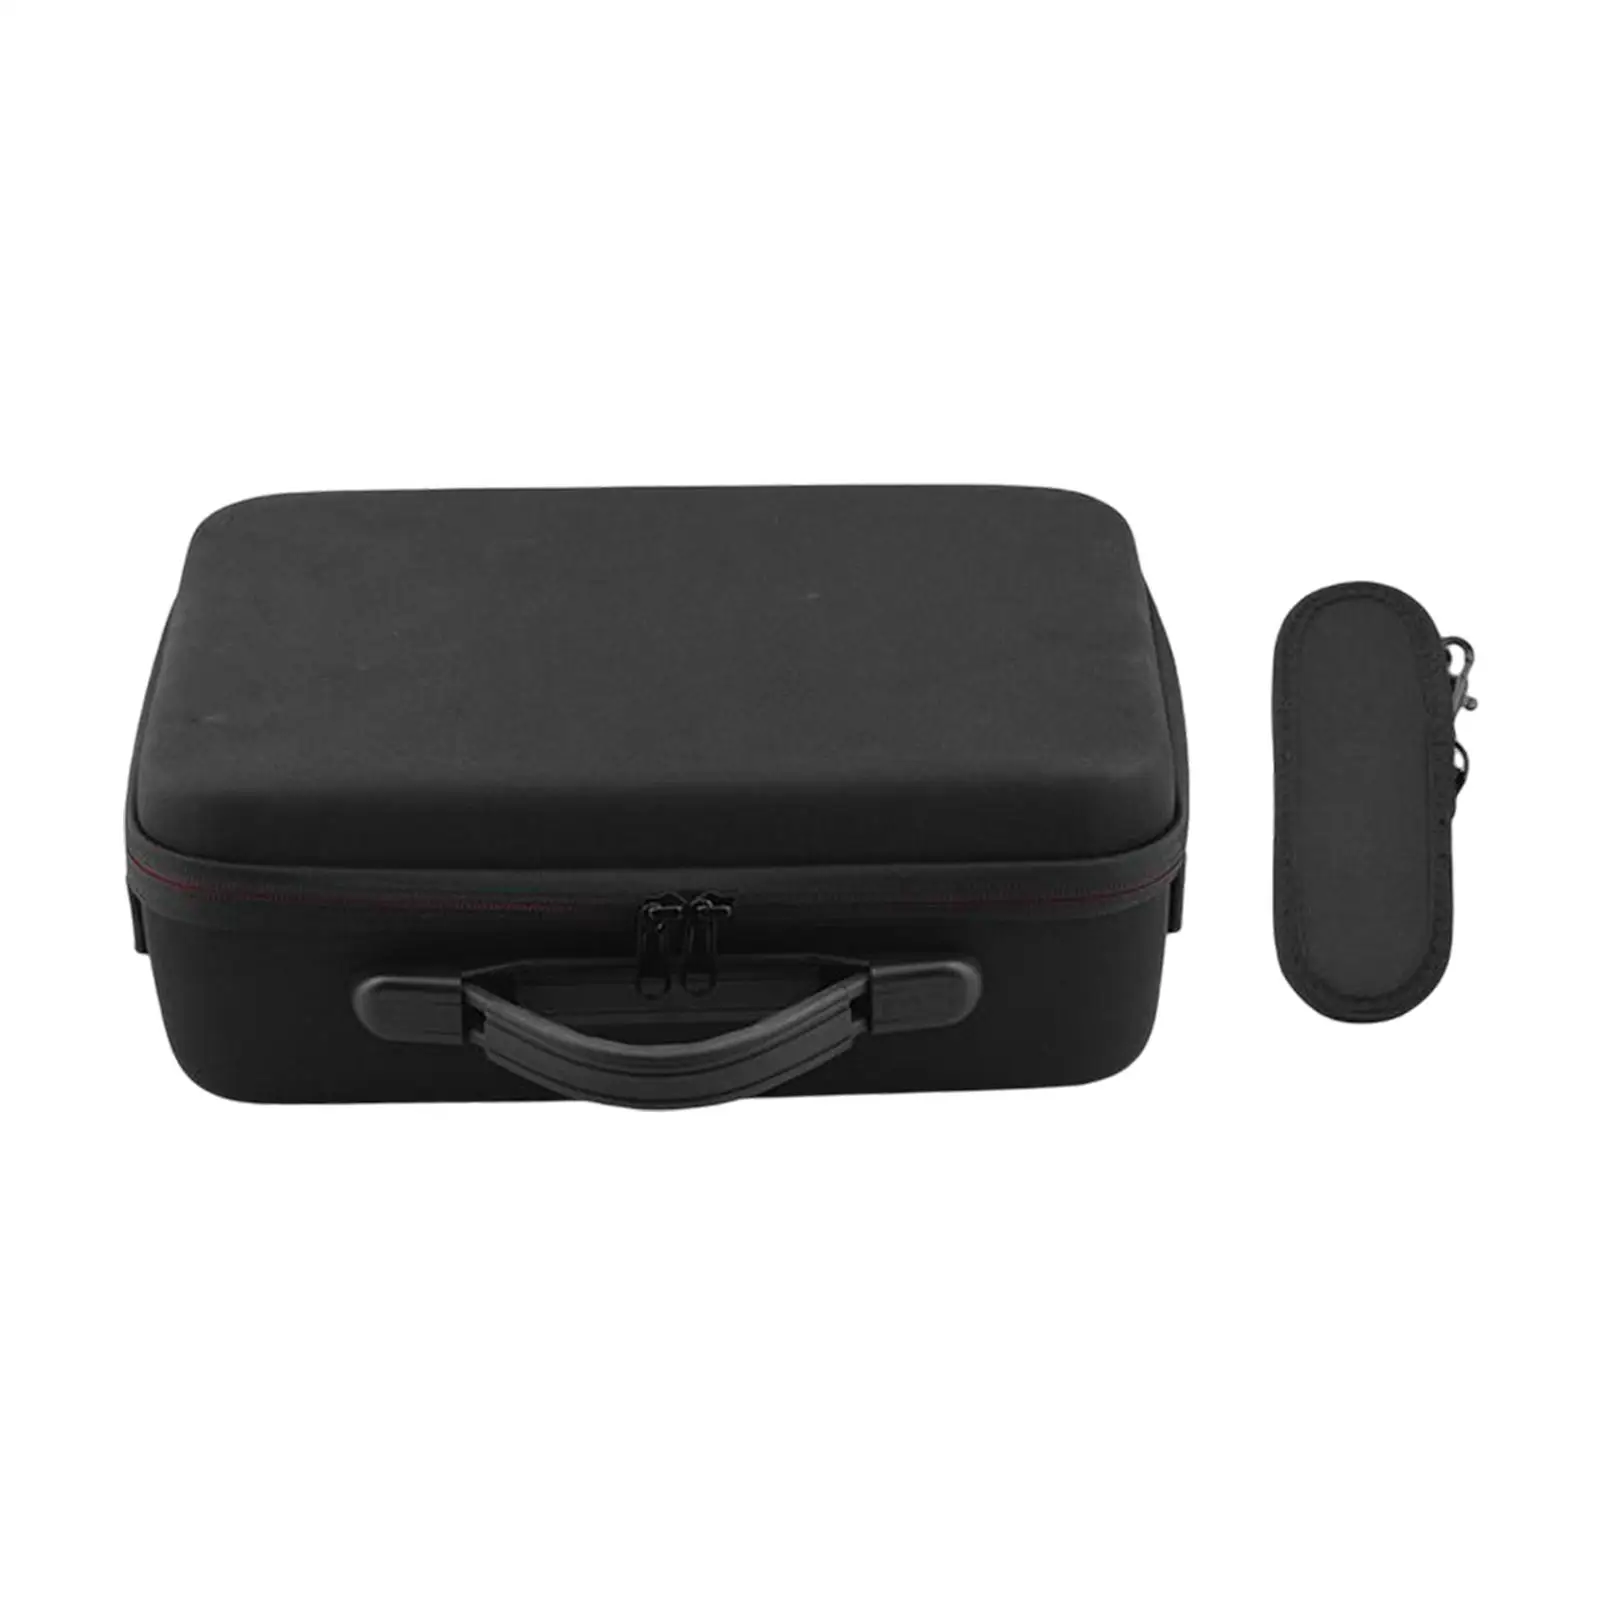 Travel Drone Carrying case Storage Box Shoulder Bag Shockproof Protective Case Handbag for Air RC Drone Parts